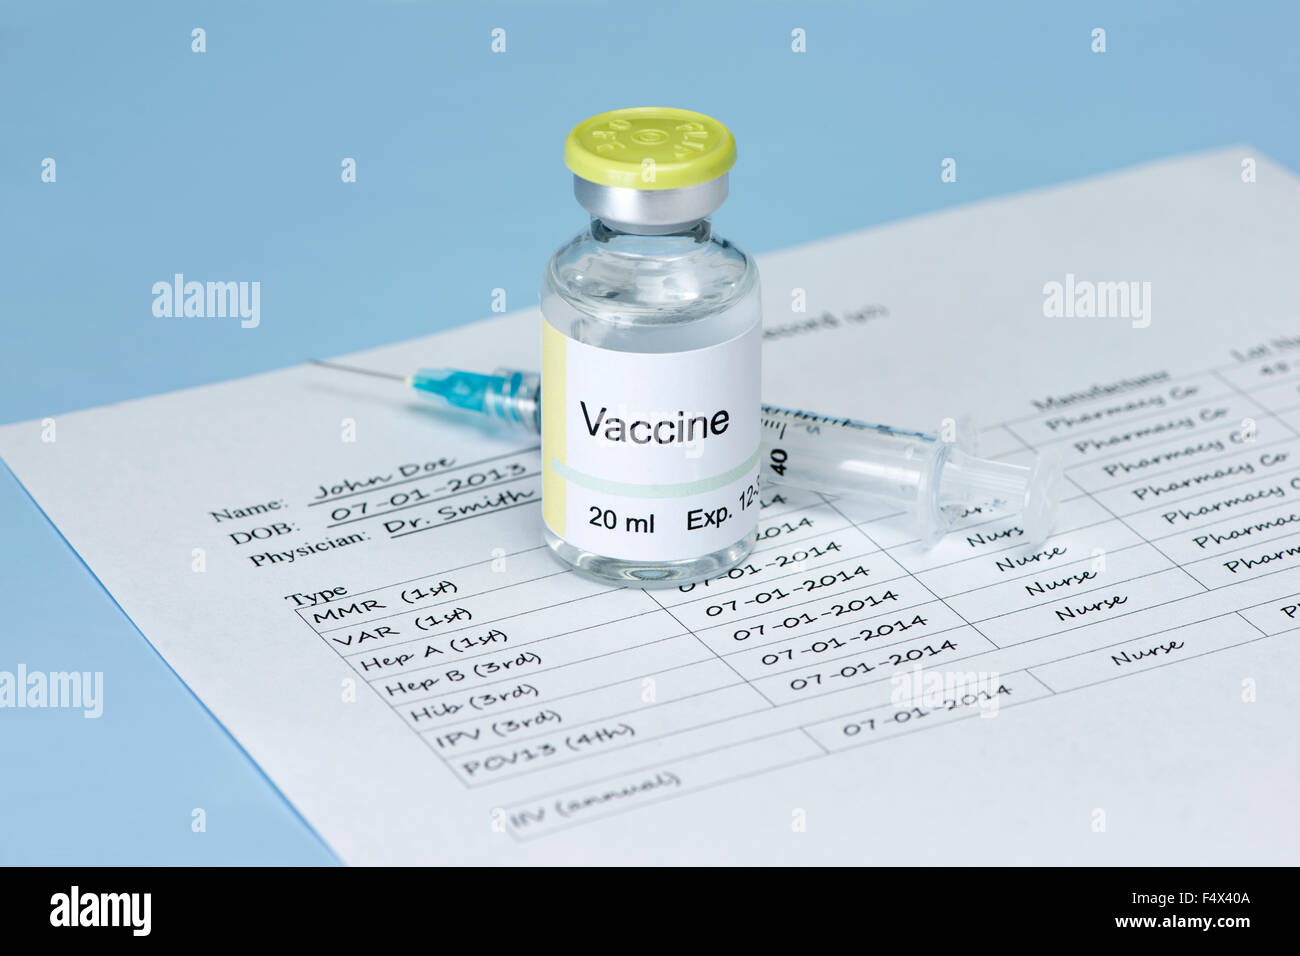 Vaccine vial with immunization record and syringe on white background. Label and record are fictitious. Stock Photo